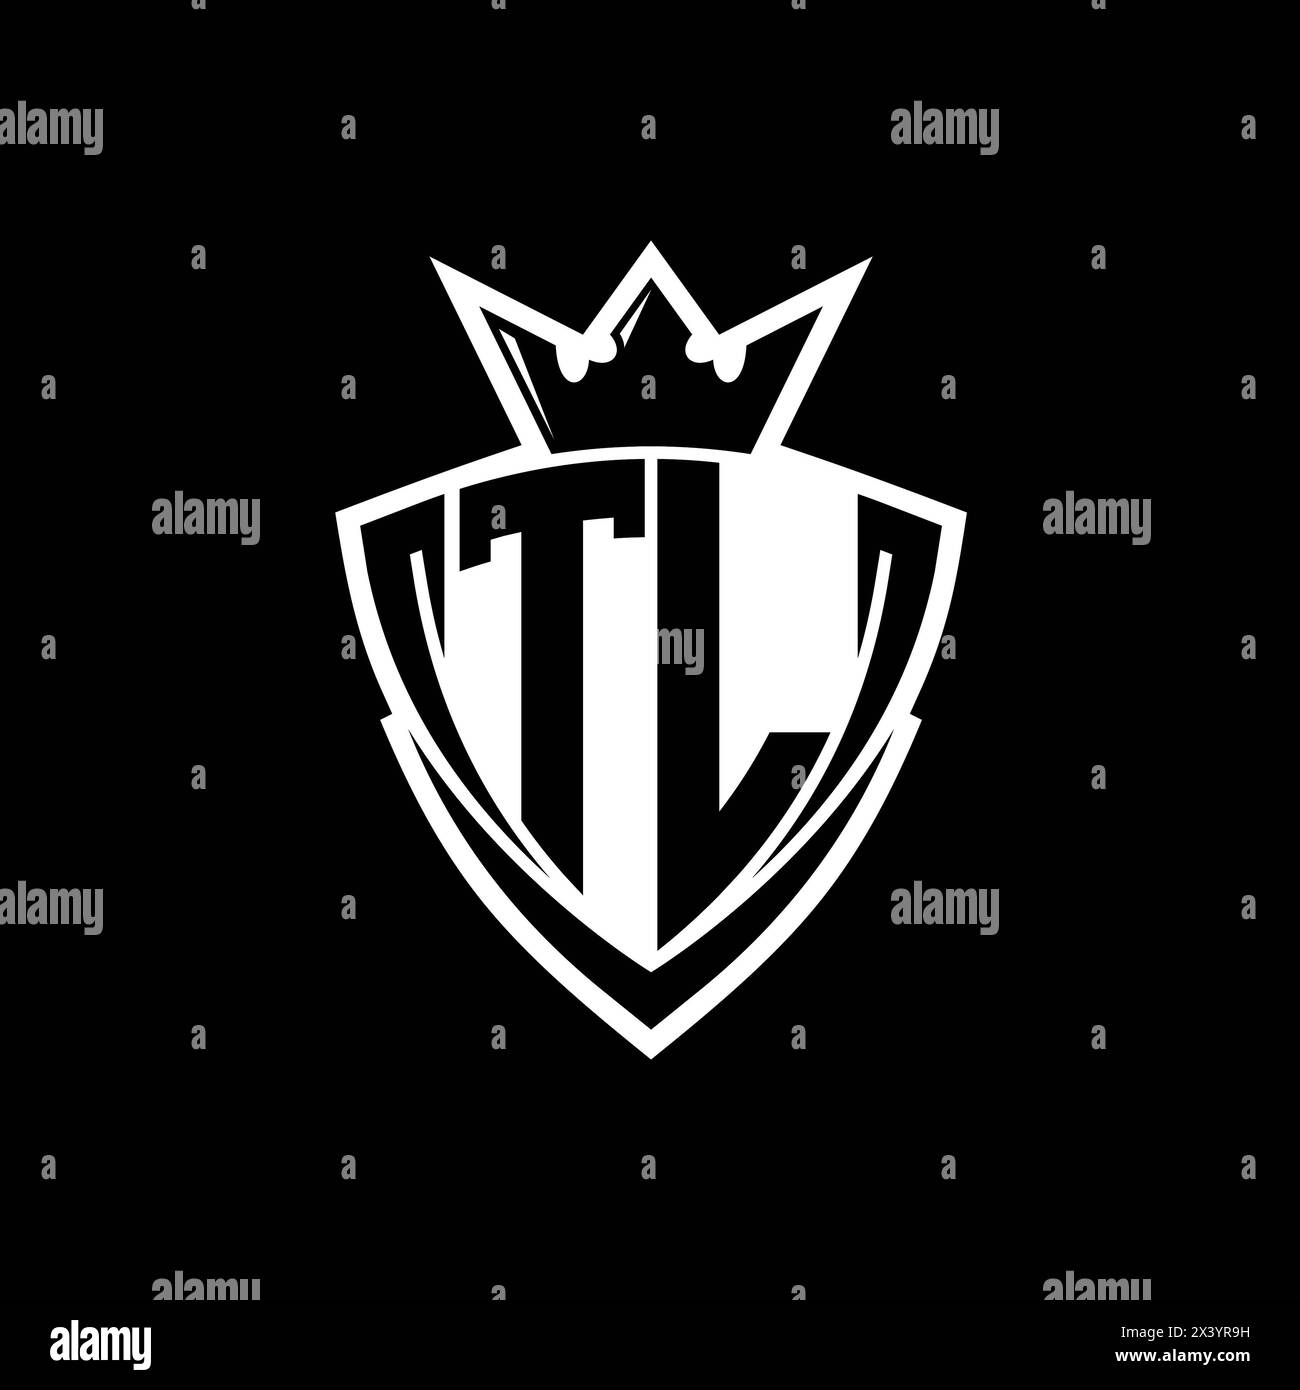 TL Bold letter logo with sharp triangle shield shape with crown inside white outline on black background template design Stock Photo